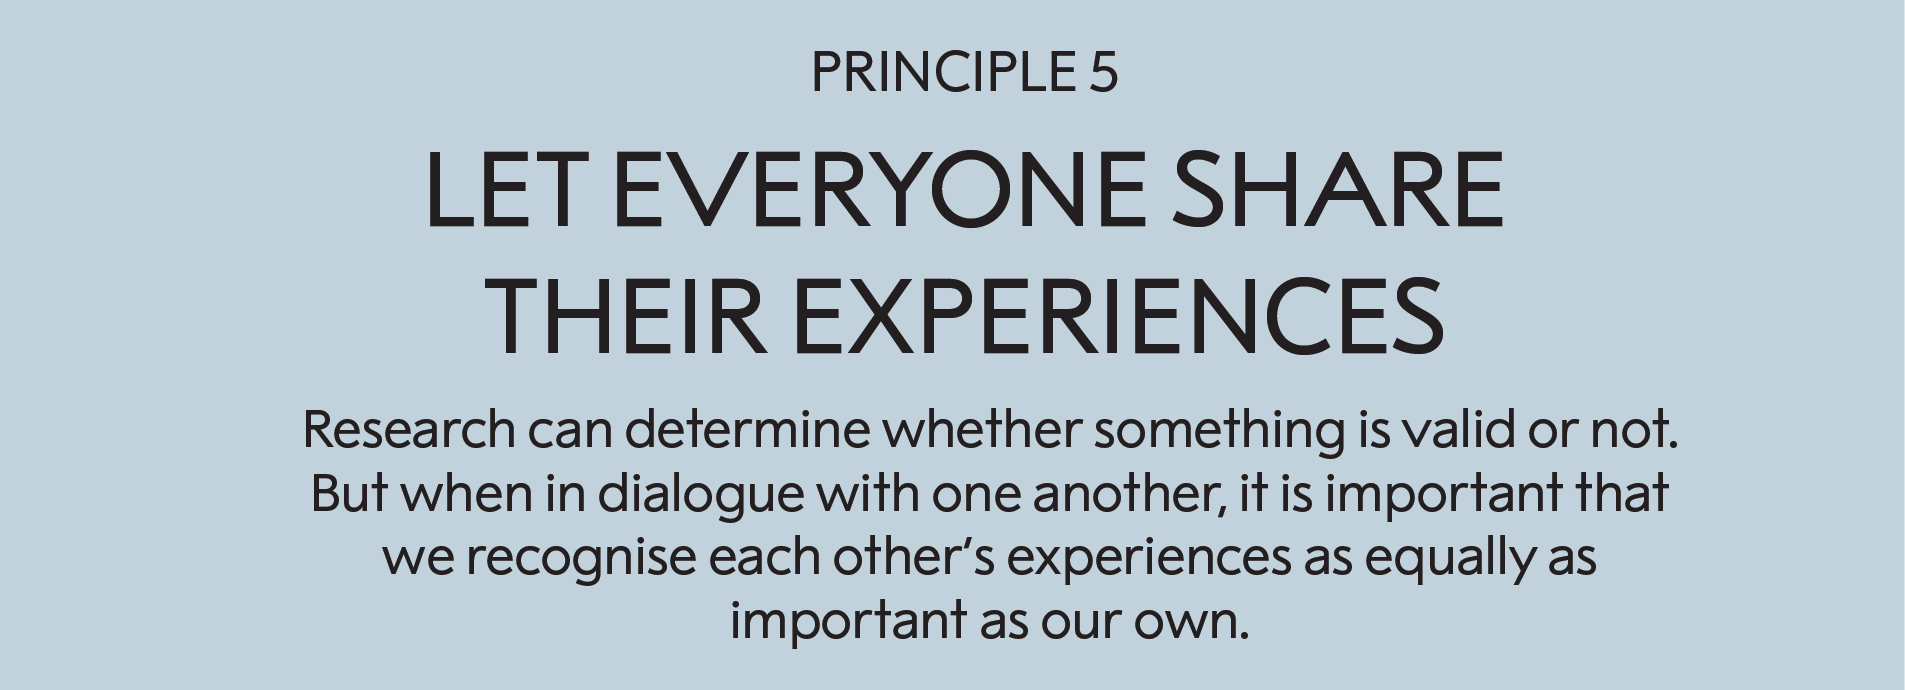 Principle 5: Let everyone share their experiences:   Research can determine whether something is valid or not. But when in dialogue with one another, it is important that we recognise each other’s experiences as equally as important as our own. 